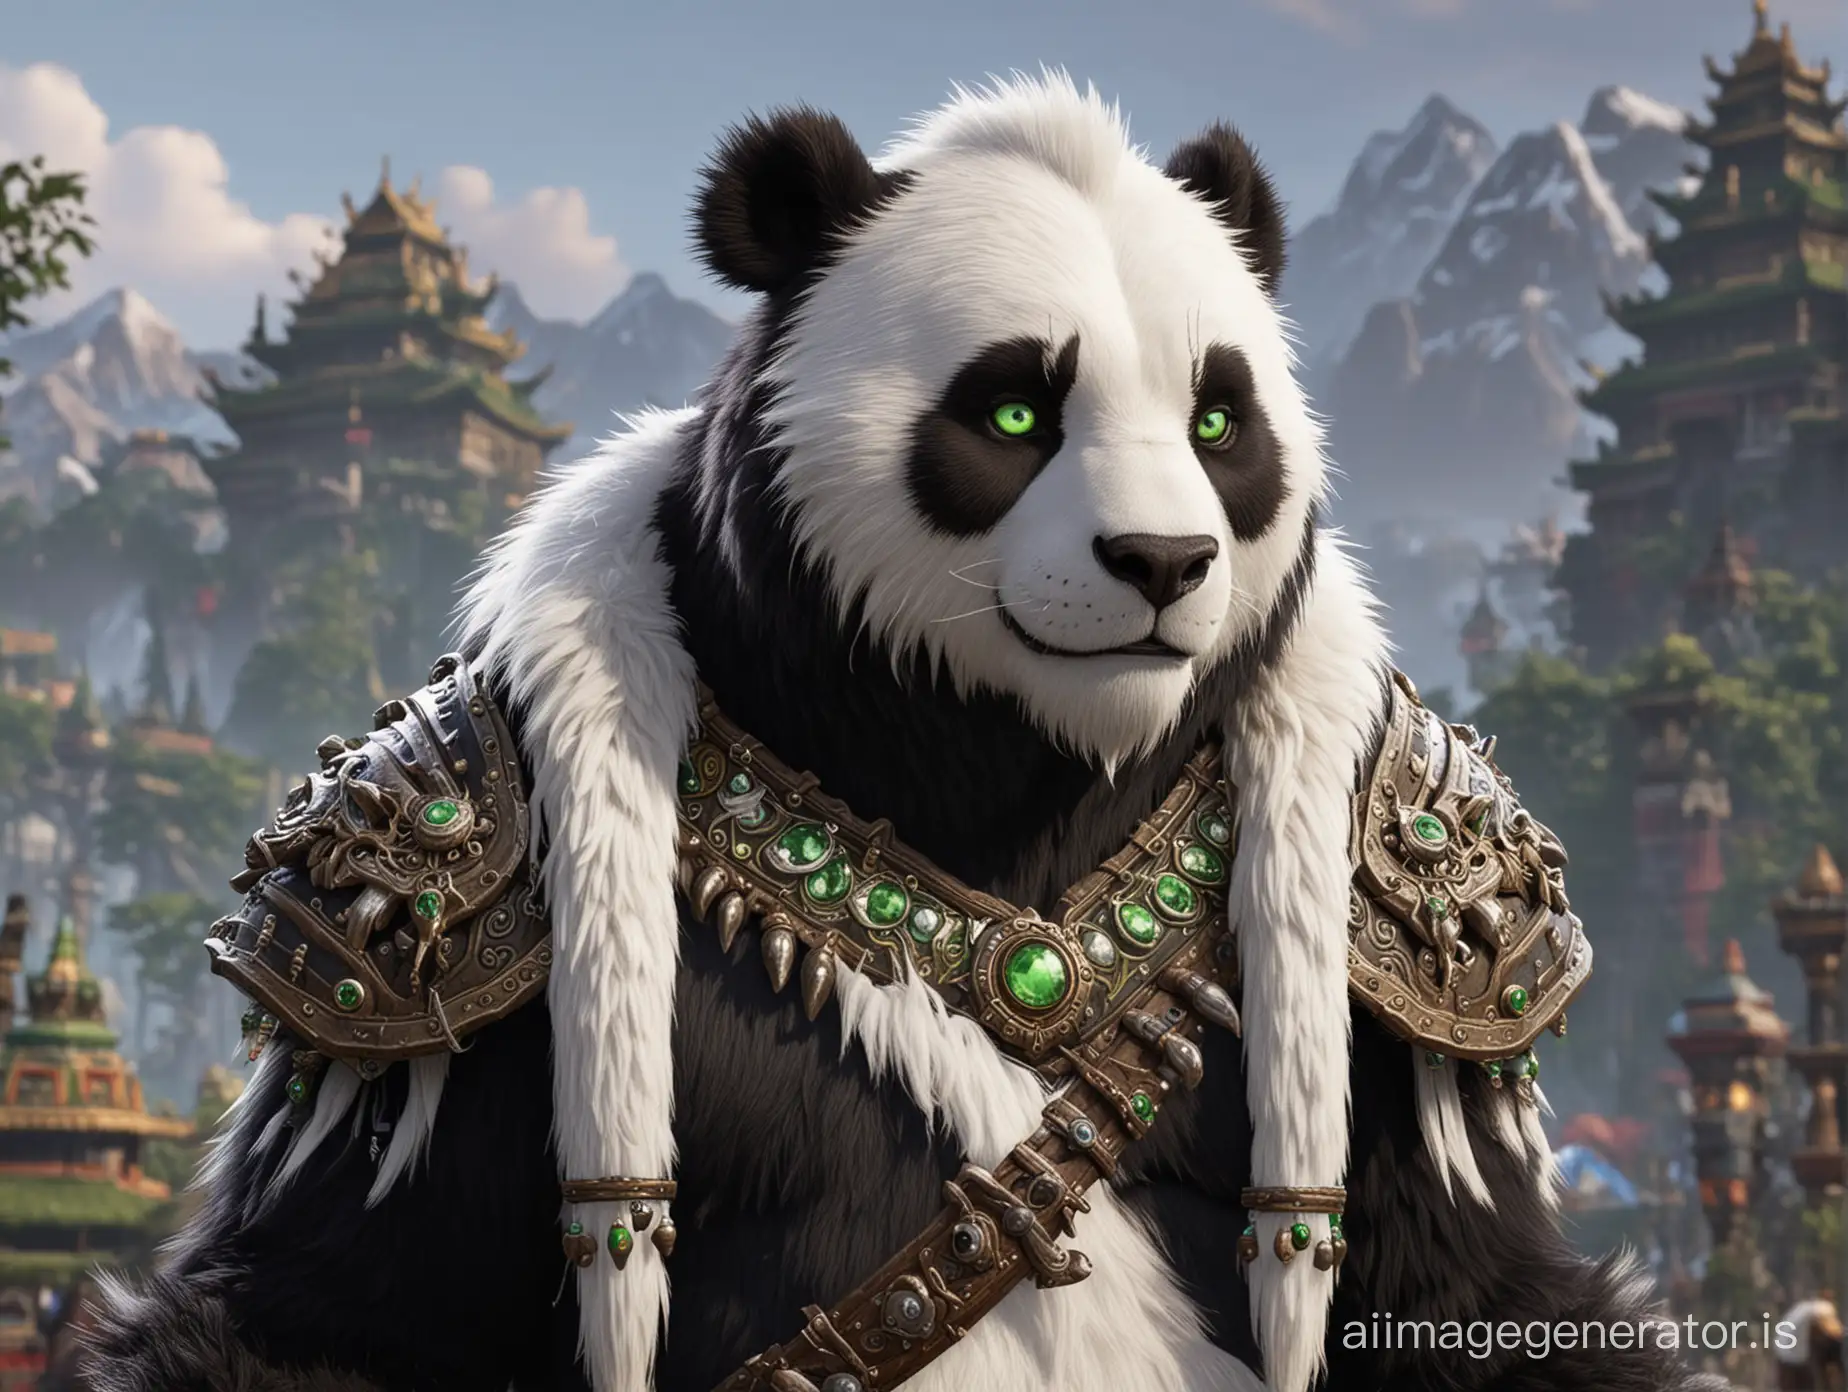 Pandarian from World of Warcraft with green eyes and white and black fur standing in Pandaria